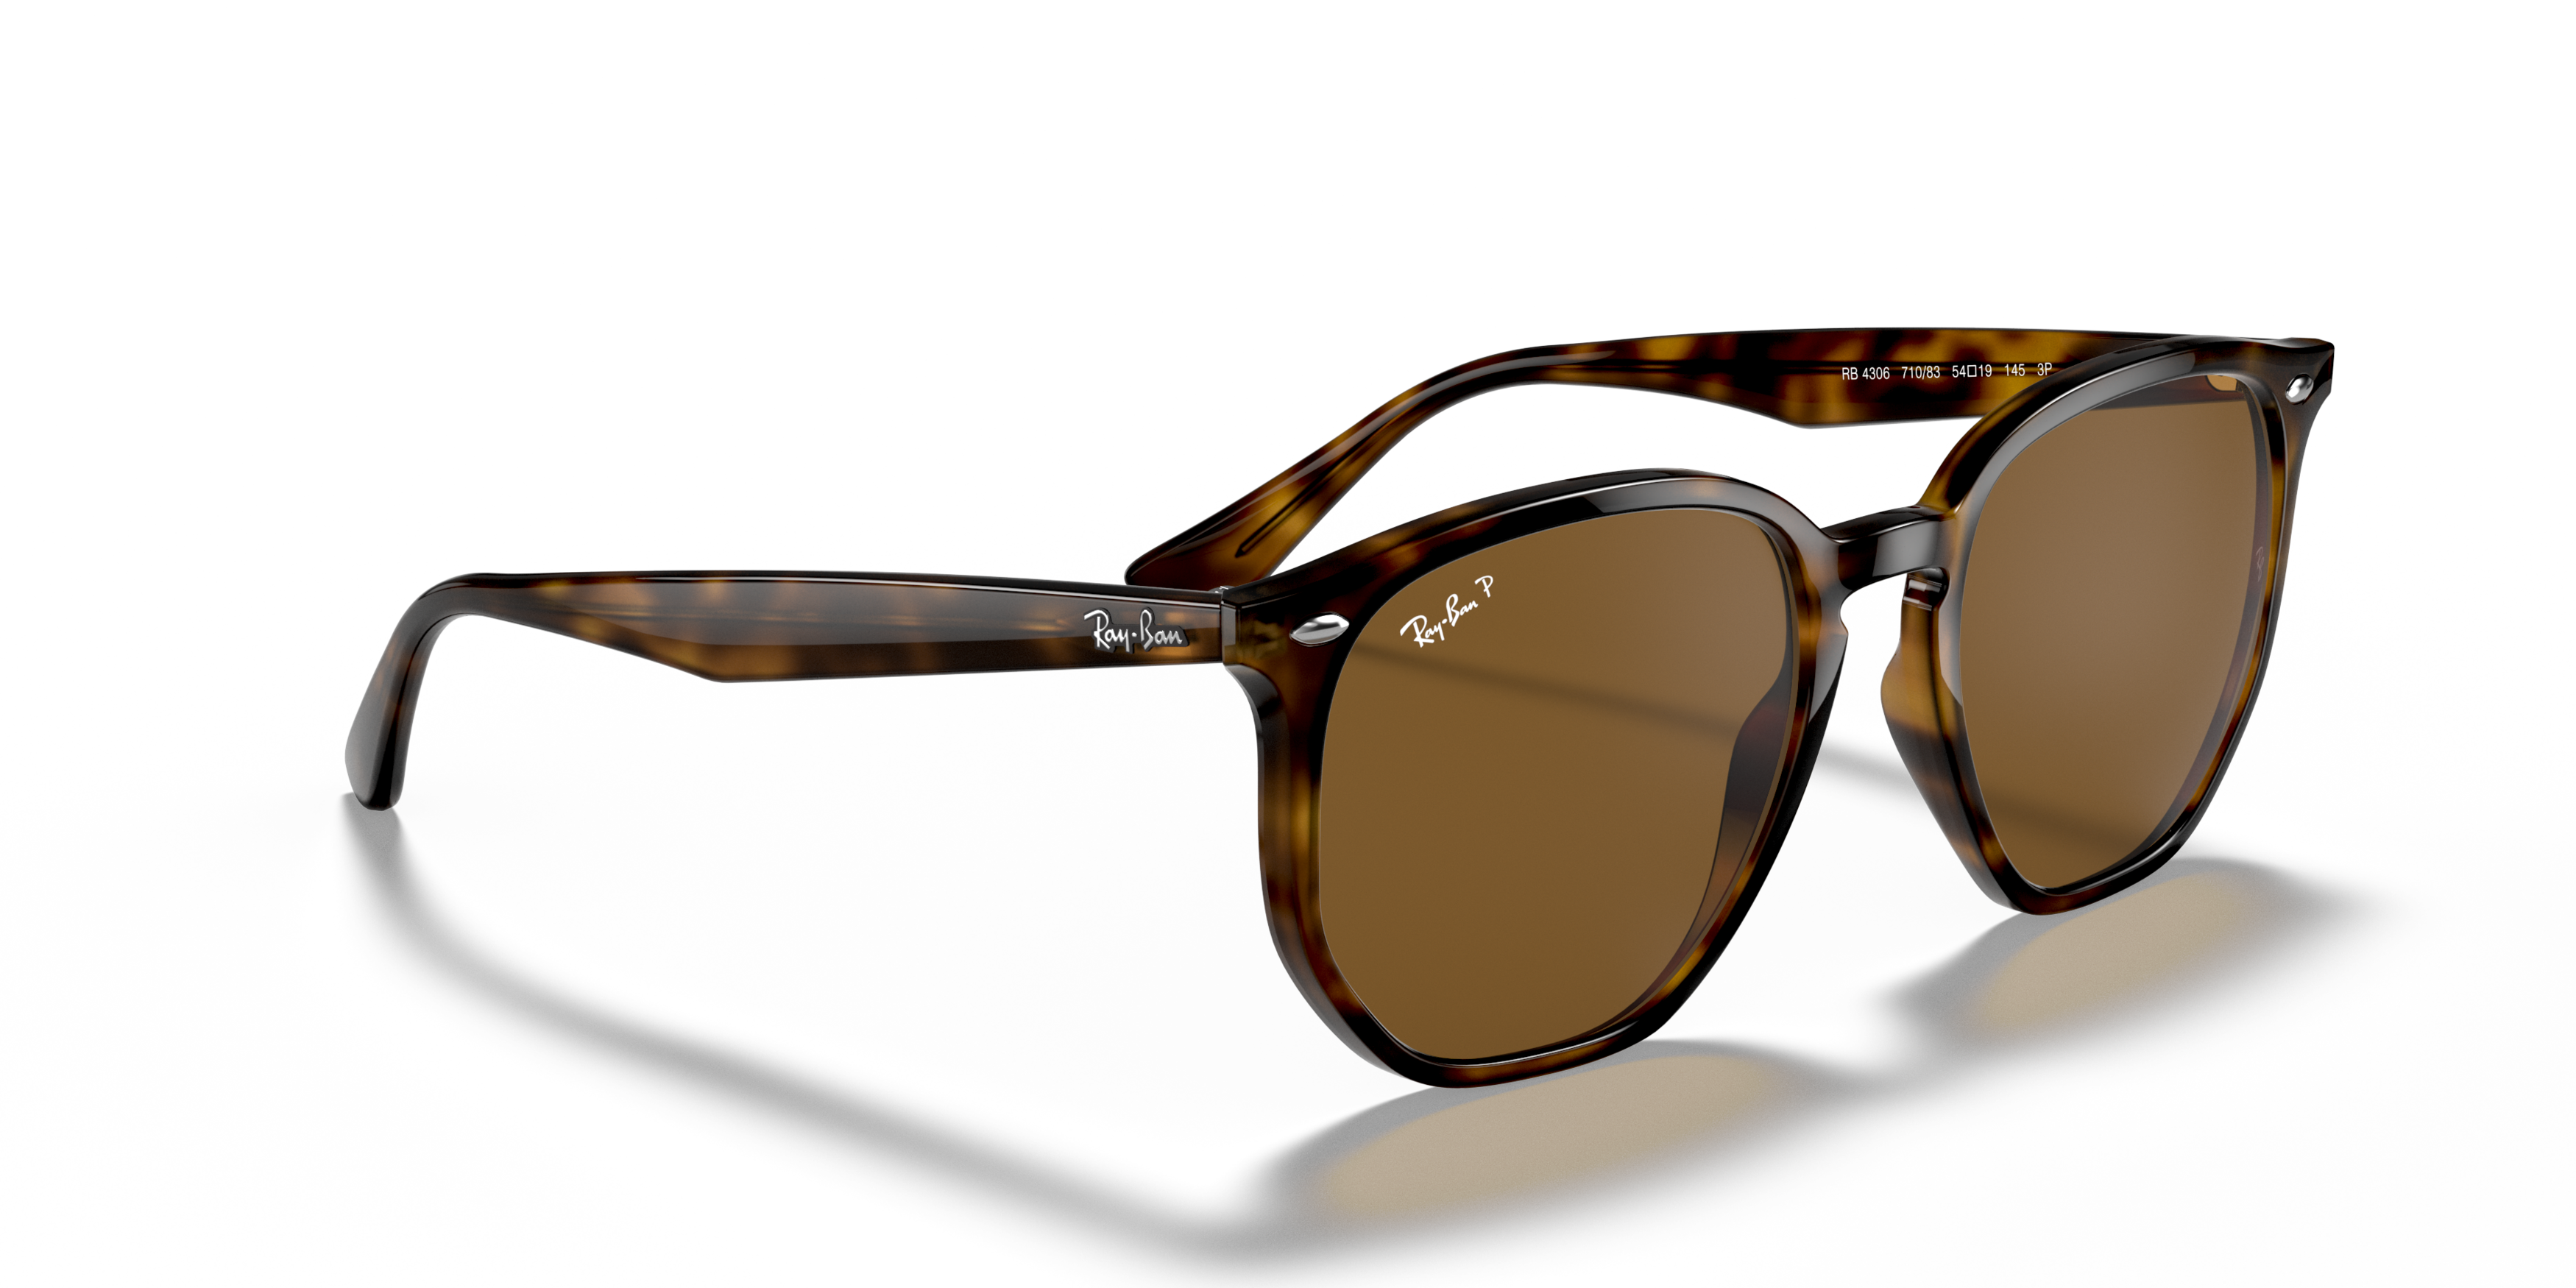 Angle_Right01 Ray-Ban RB 4306 (710/83) Sunglasses Brown / Transparent, Tortoise Shell